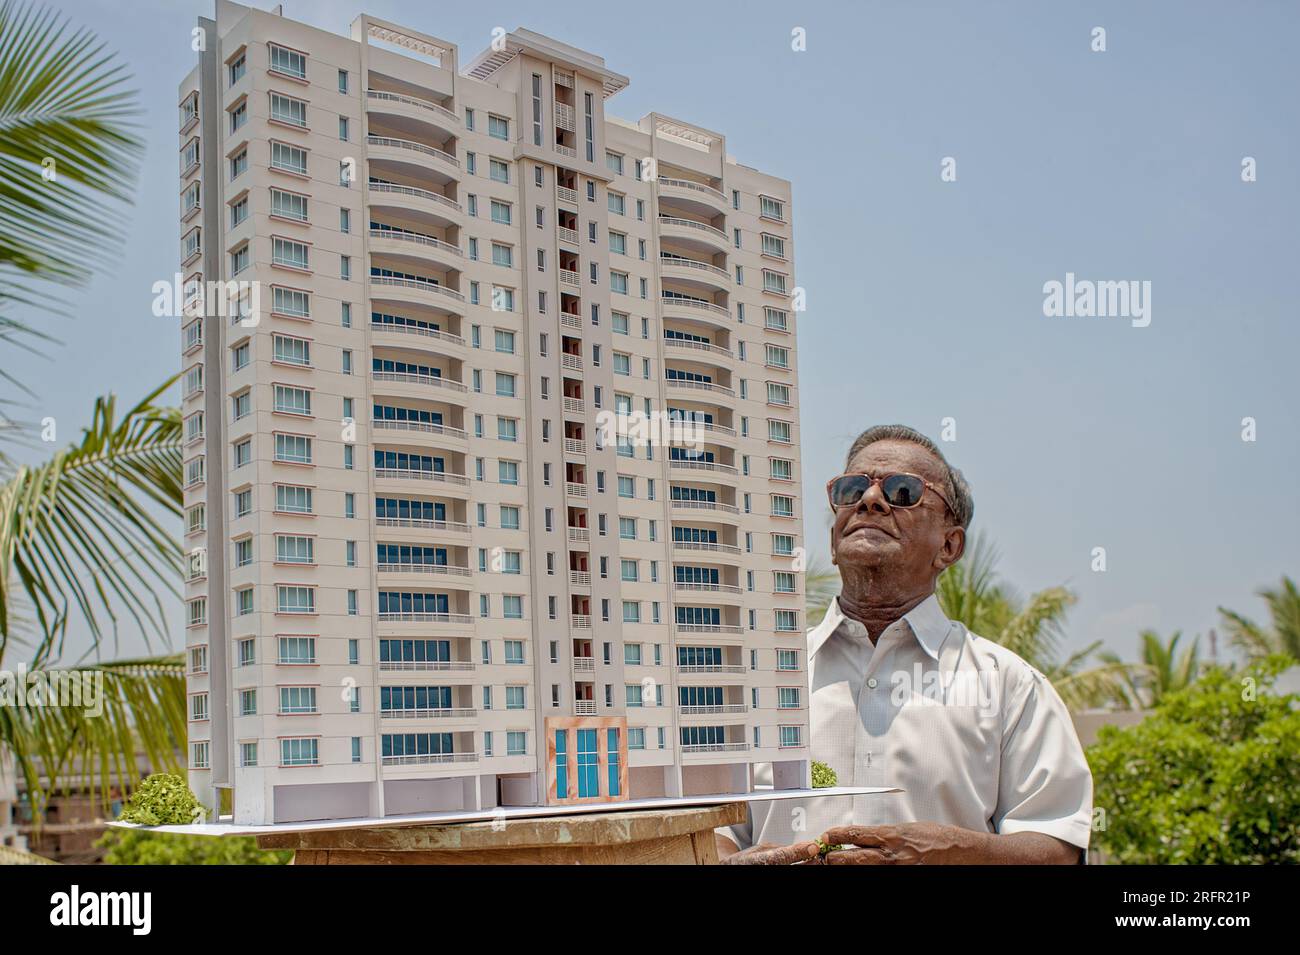 08 18 2009 an architectural scale model of a fteen storey  Residential Building structure made White Mountboard by Mr. S L Dharma for the builder. Che Stock Photo